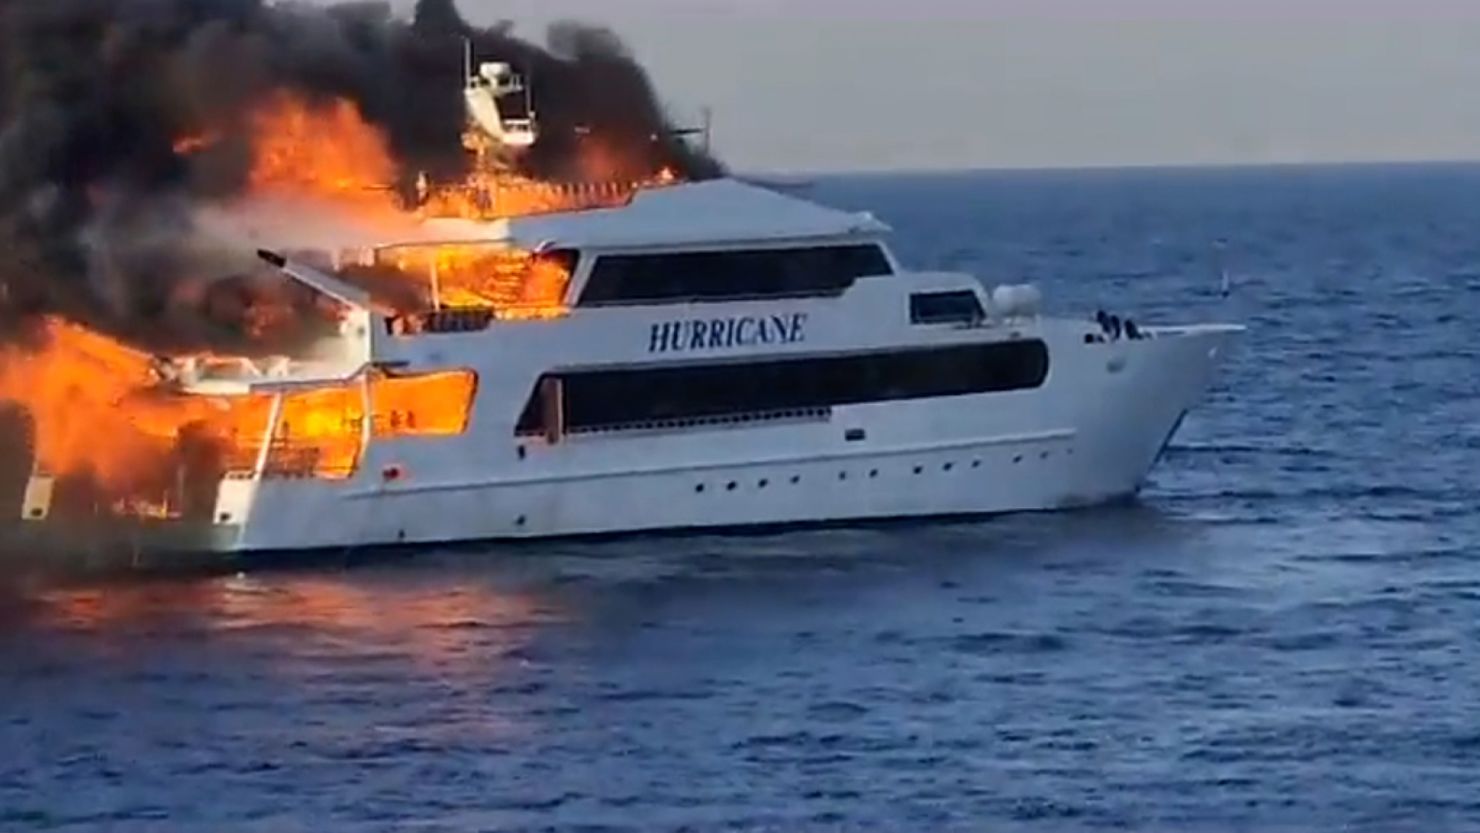 27 people were on board the boat when it caught fire on Sunday.